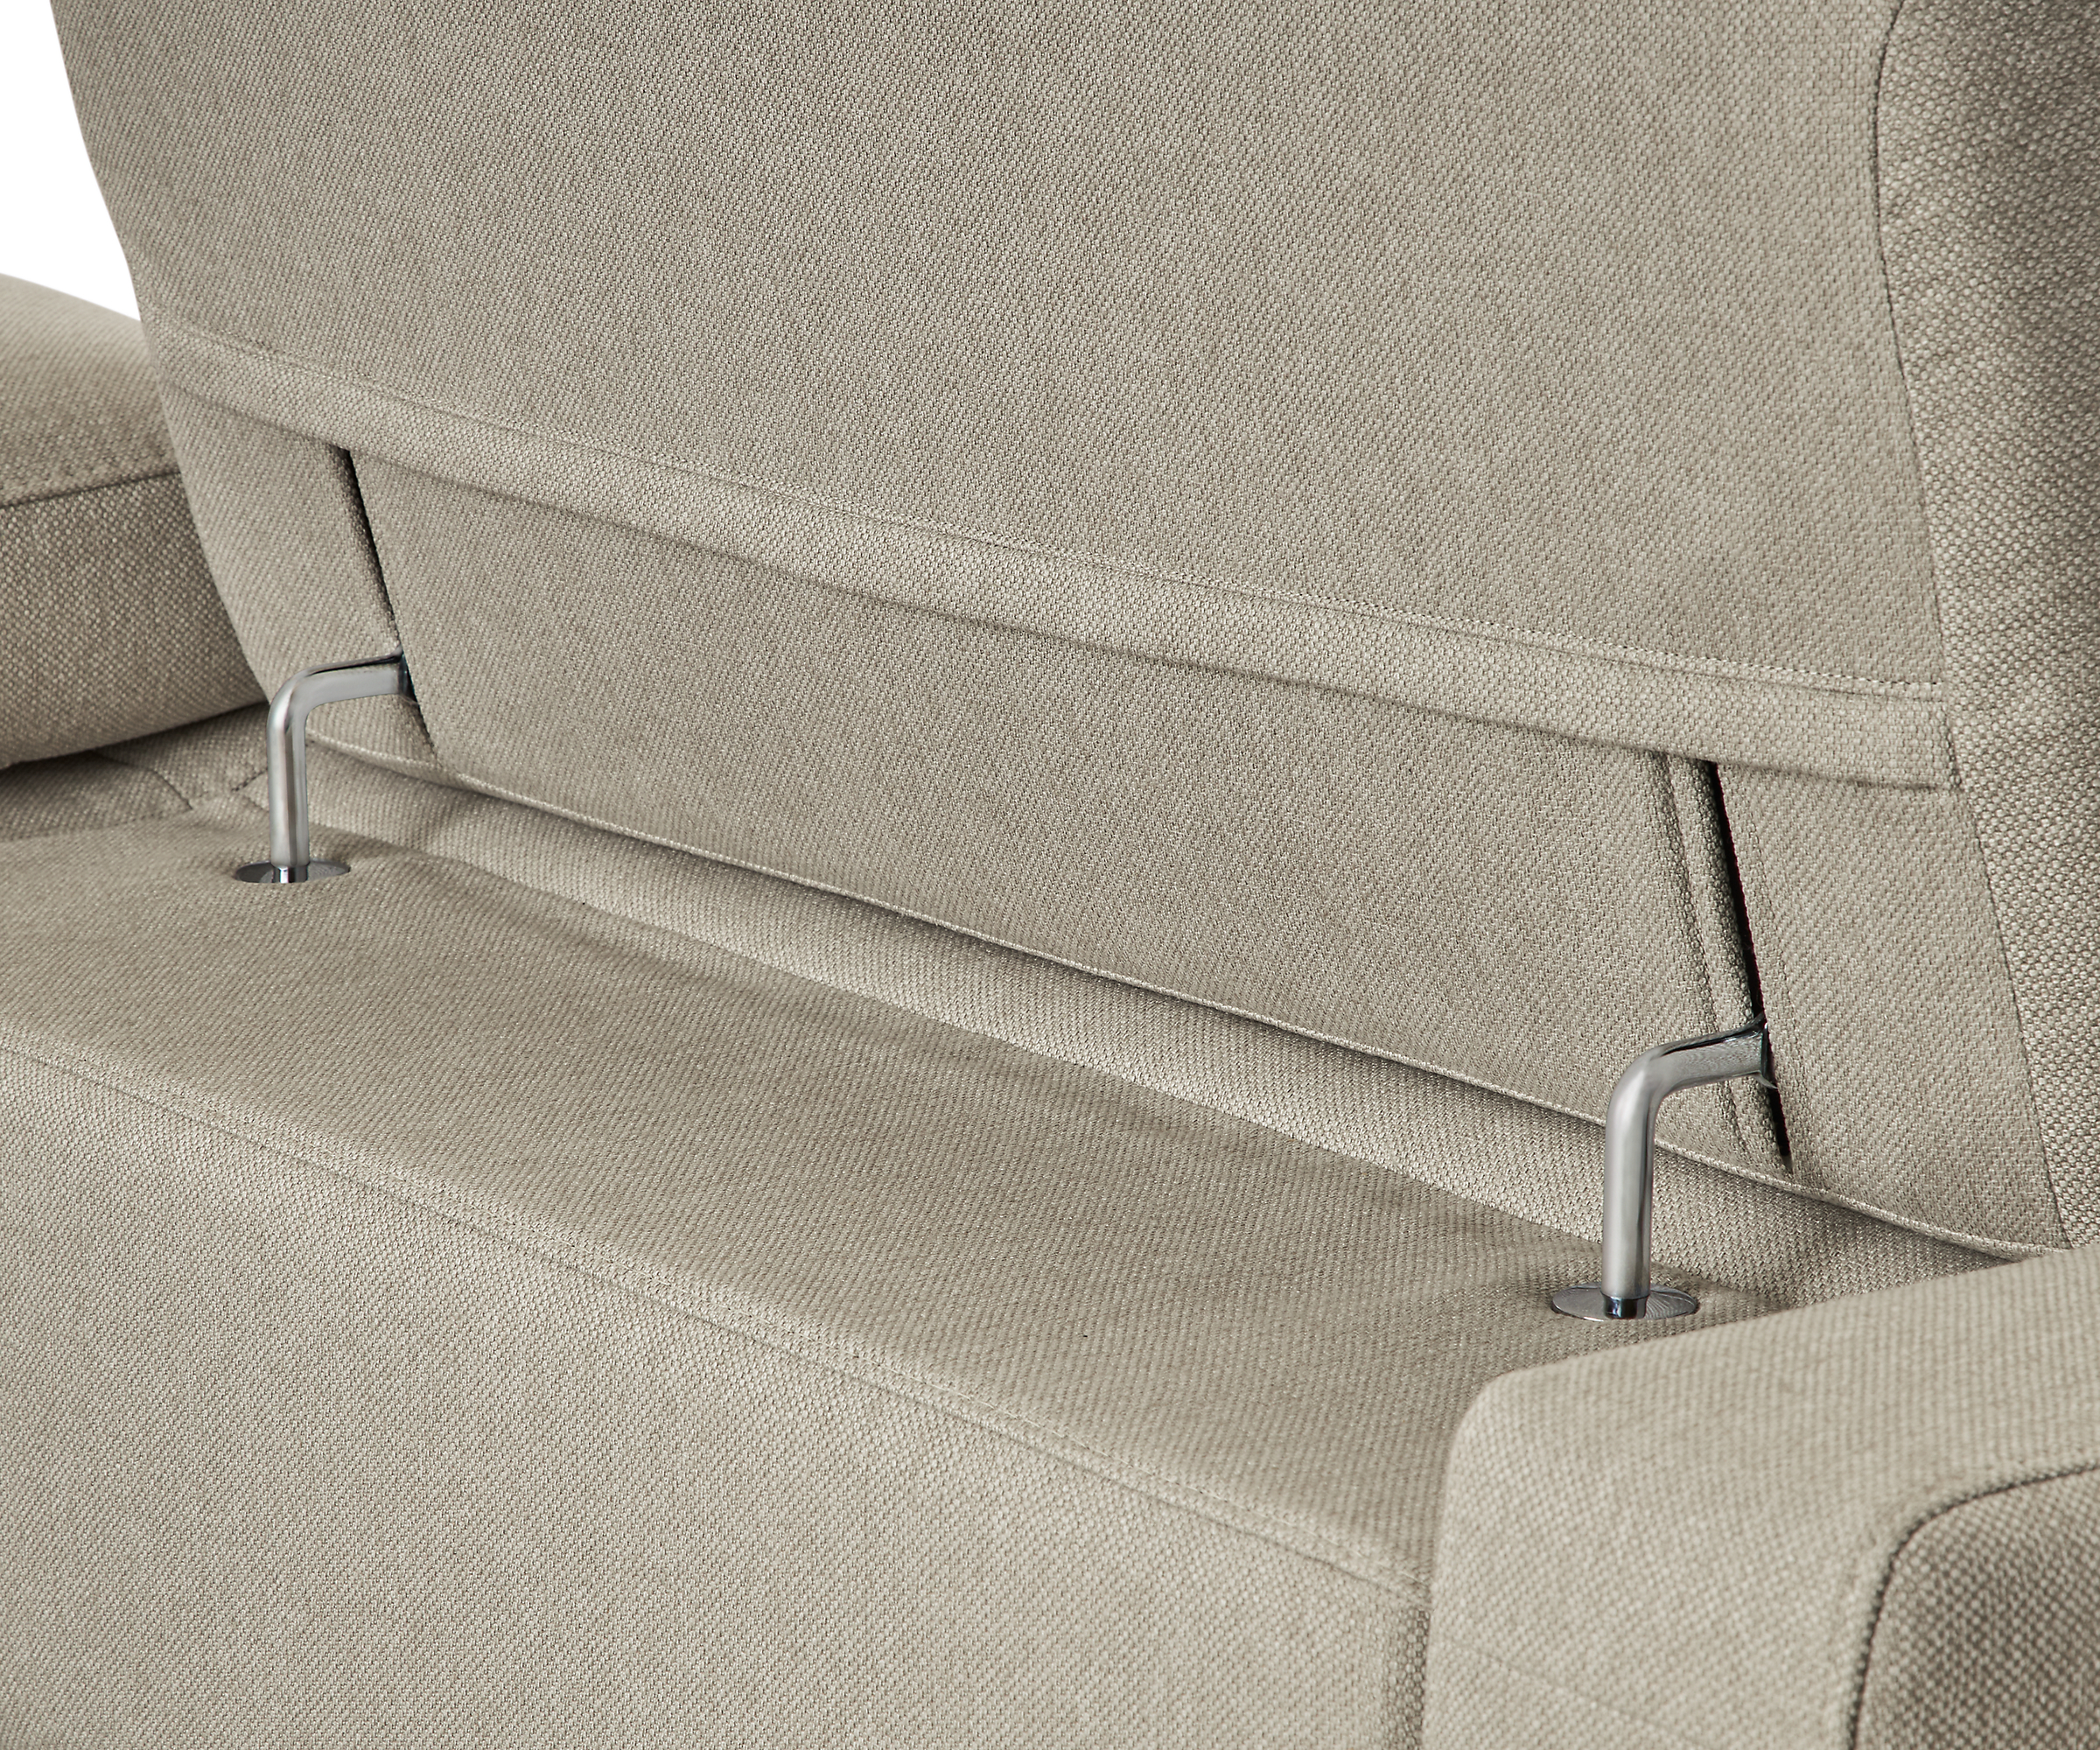 detail of back of elio powered sofa headrest extension.